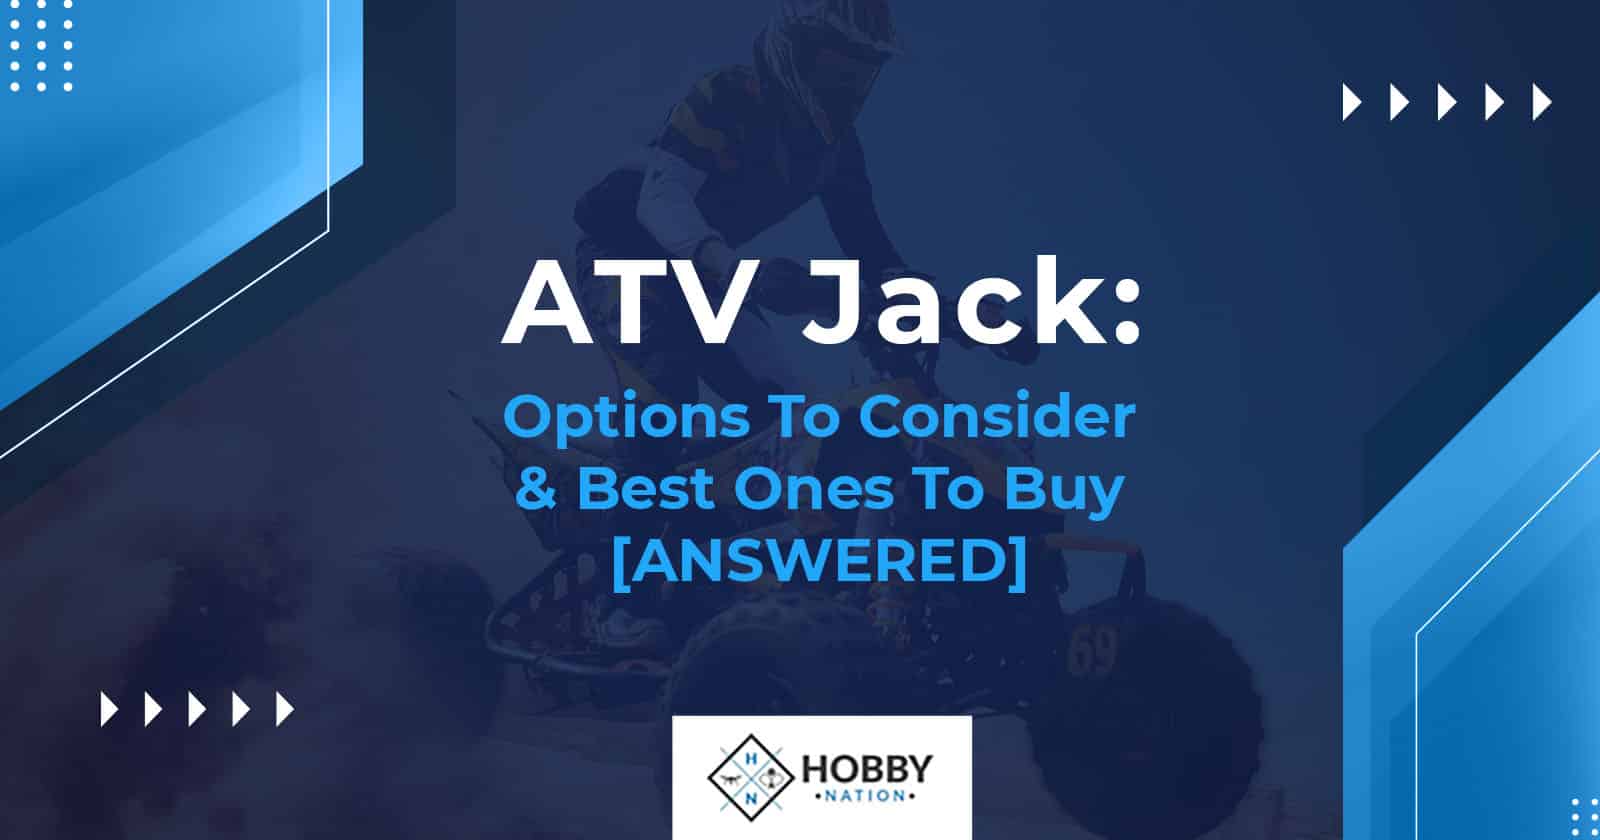 ATV Jack: Options To Consider &#038; Best Ones To Buy